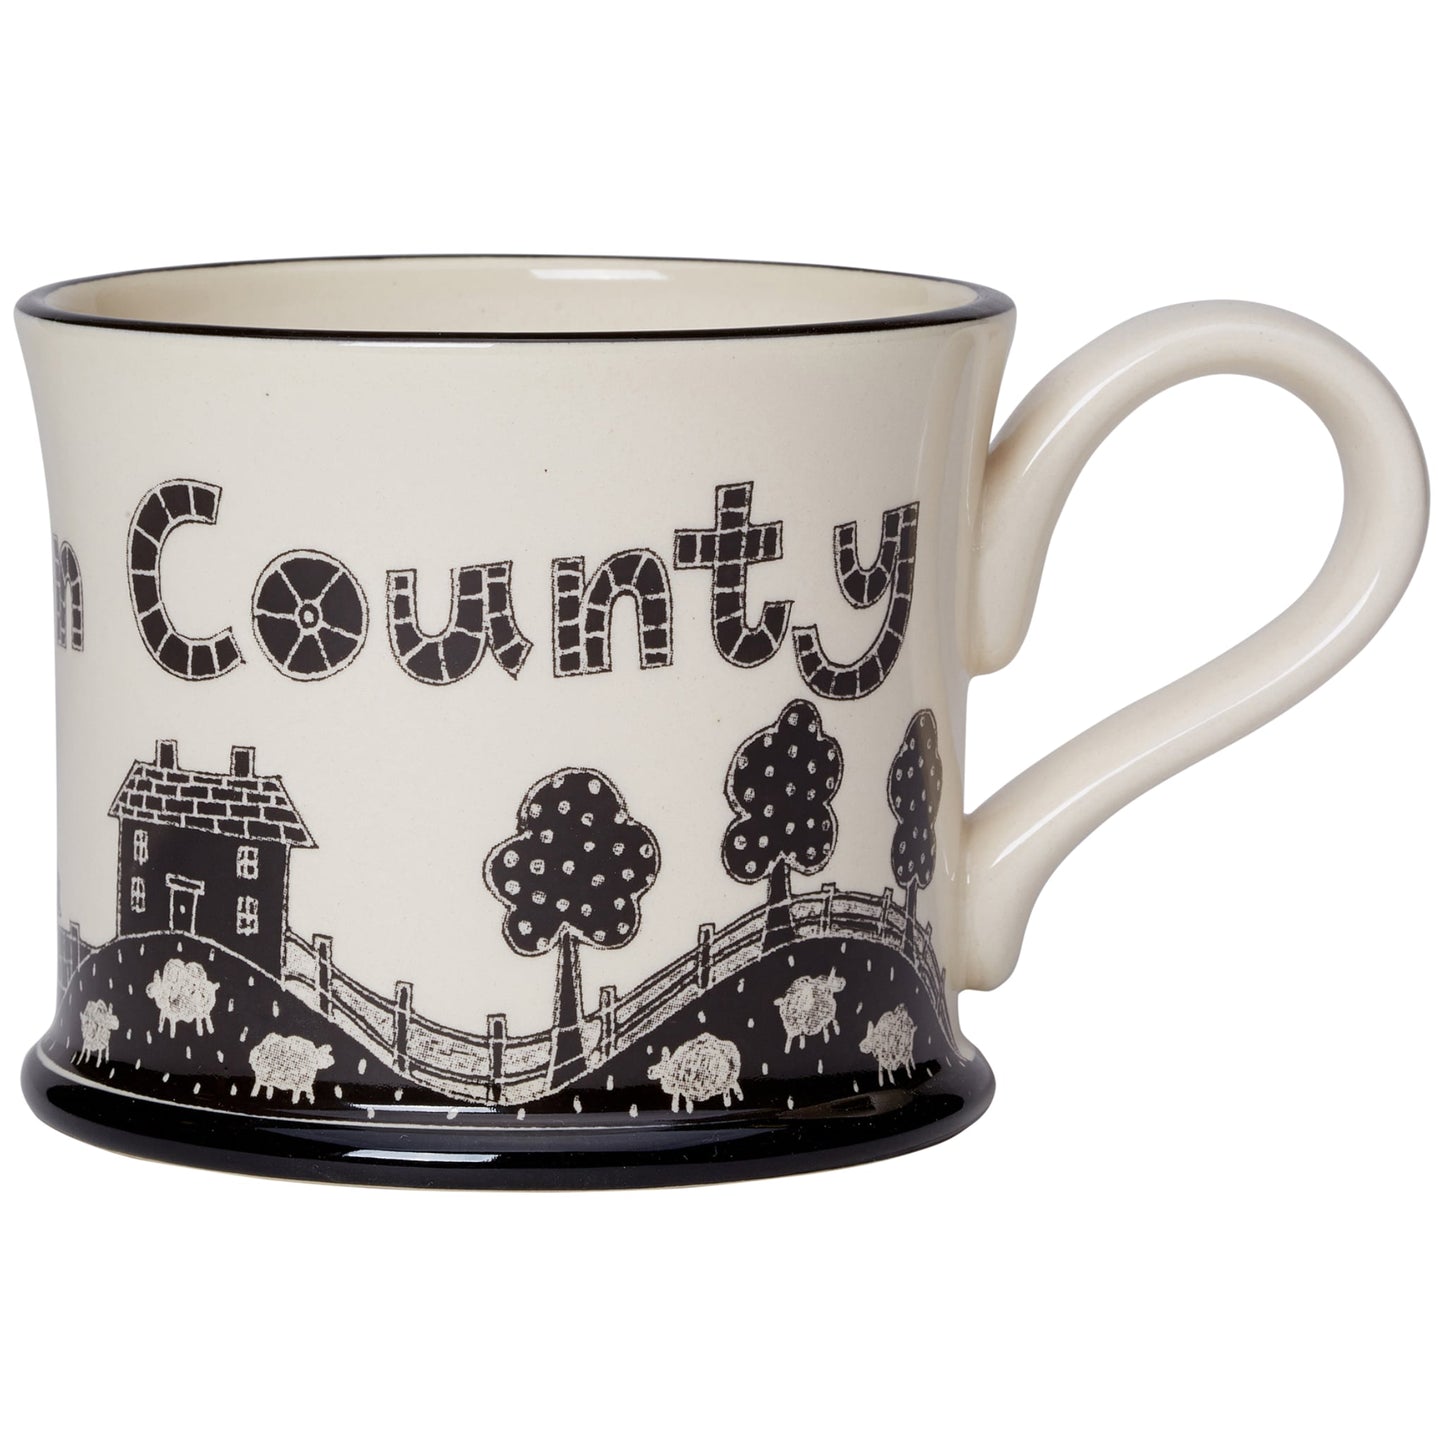 God's Own County Mug - The Great Yorkshire Shop